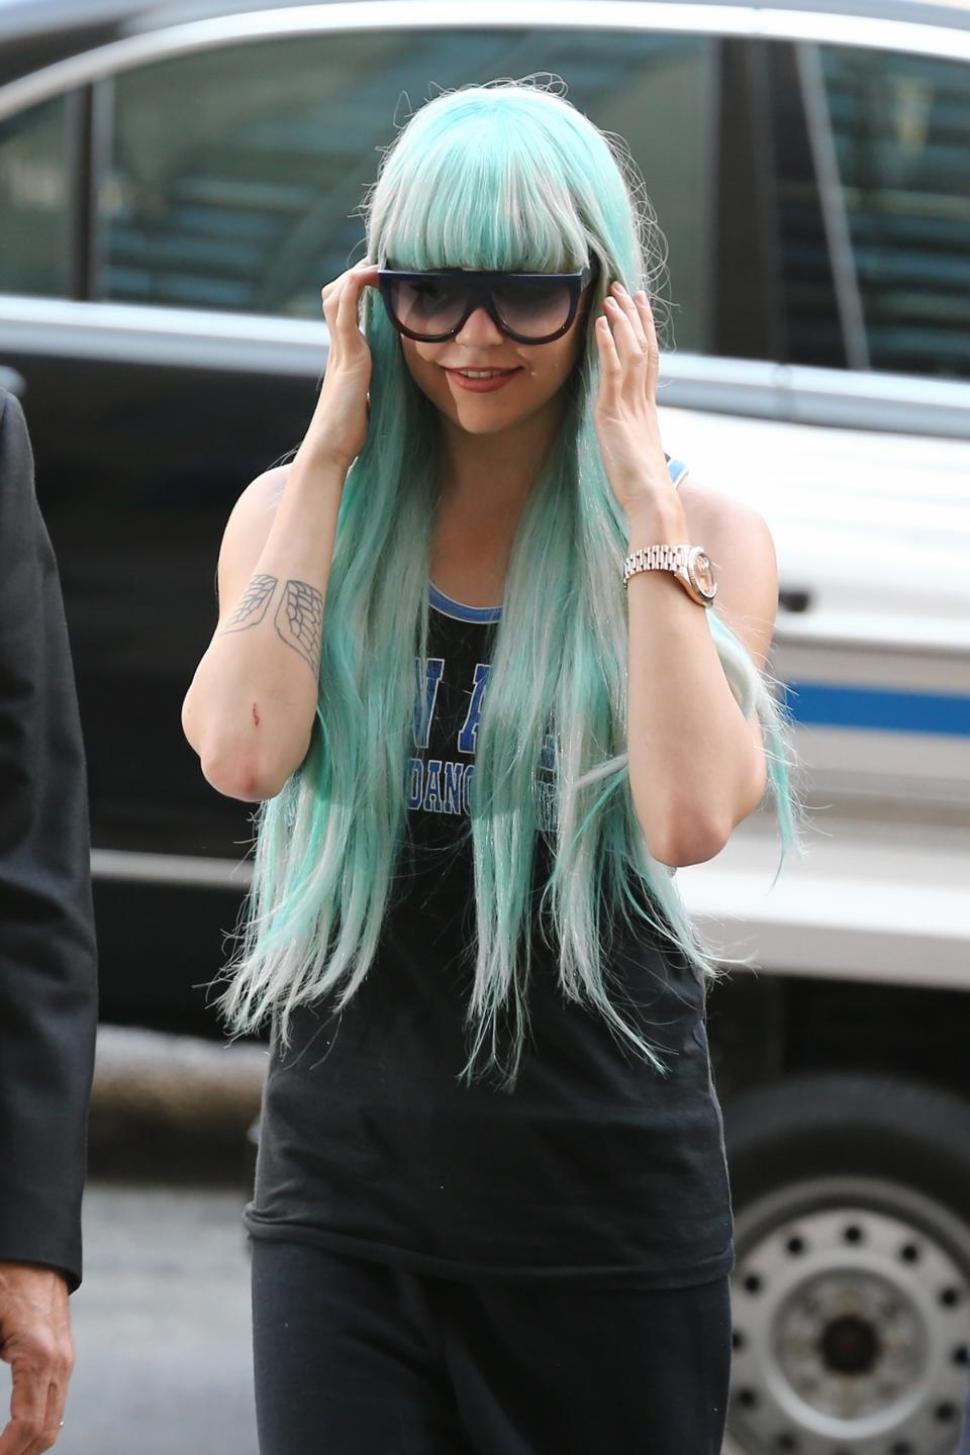  Amanda Bynes attending an appearance at Manhattan Criminal Court on July 9 in New York.